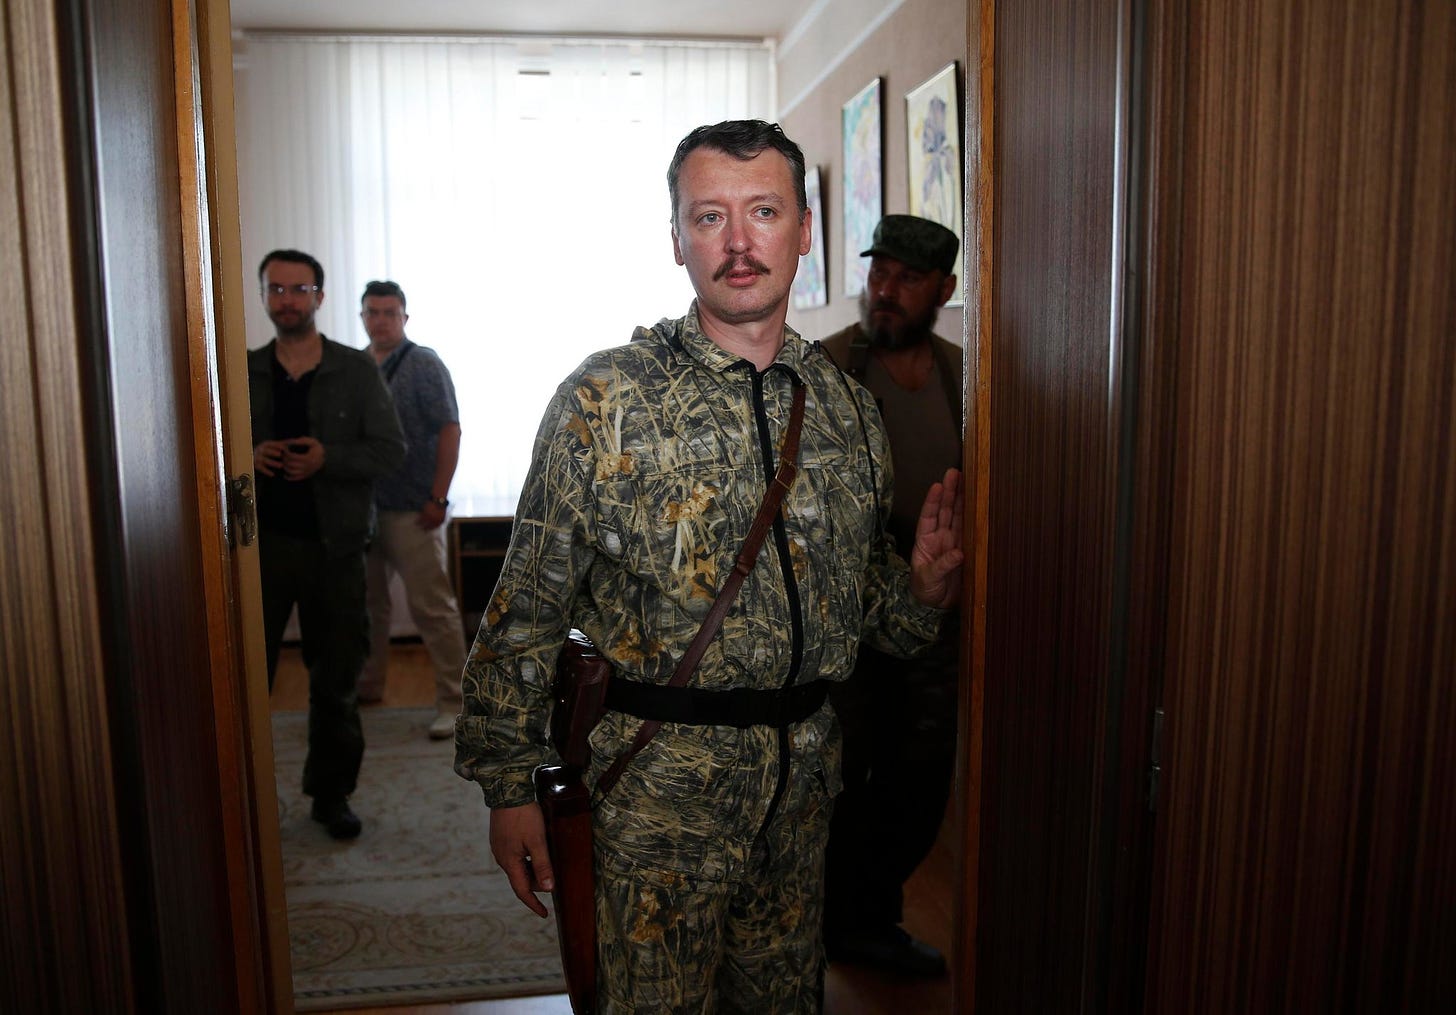 Shadowy Rebel Wields Iron Fist in Ukraine Fight - The New York Times